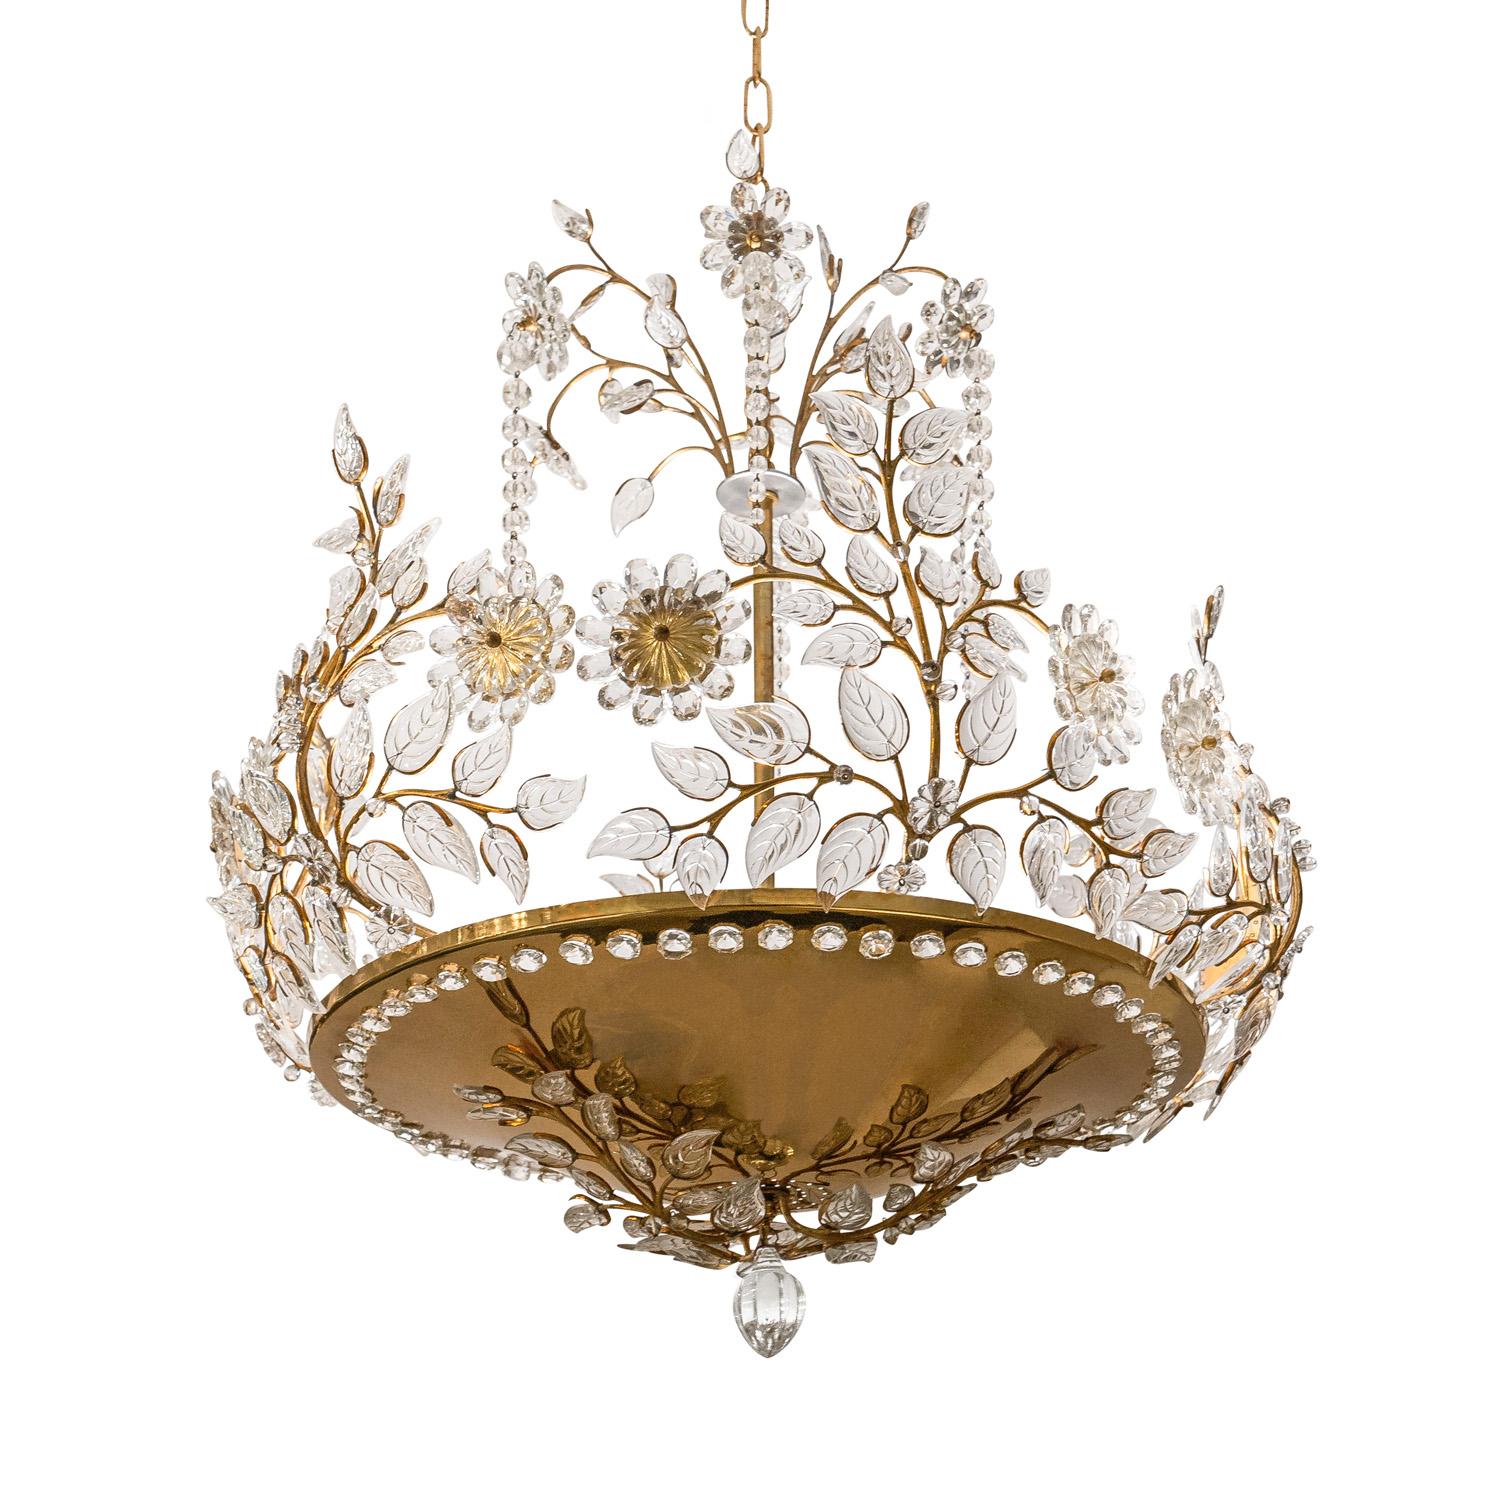 Stunning Art Nouveau inspired chandelier model K43520 in polished brass with exquisite floral motifs in hand-cut lead crystals by Palwa, Germany 1960's.  This chandelier takes 6 medium based bulbs so it can give off quite a lot of light.  Brass has